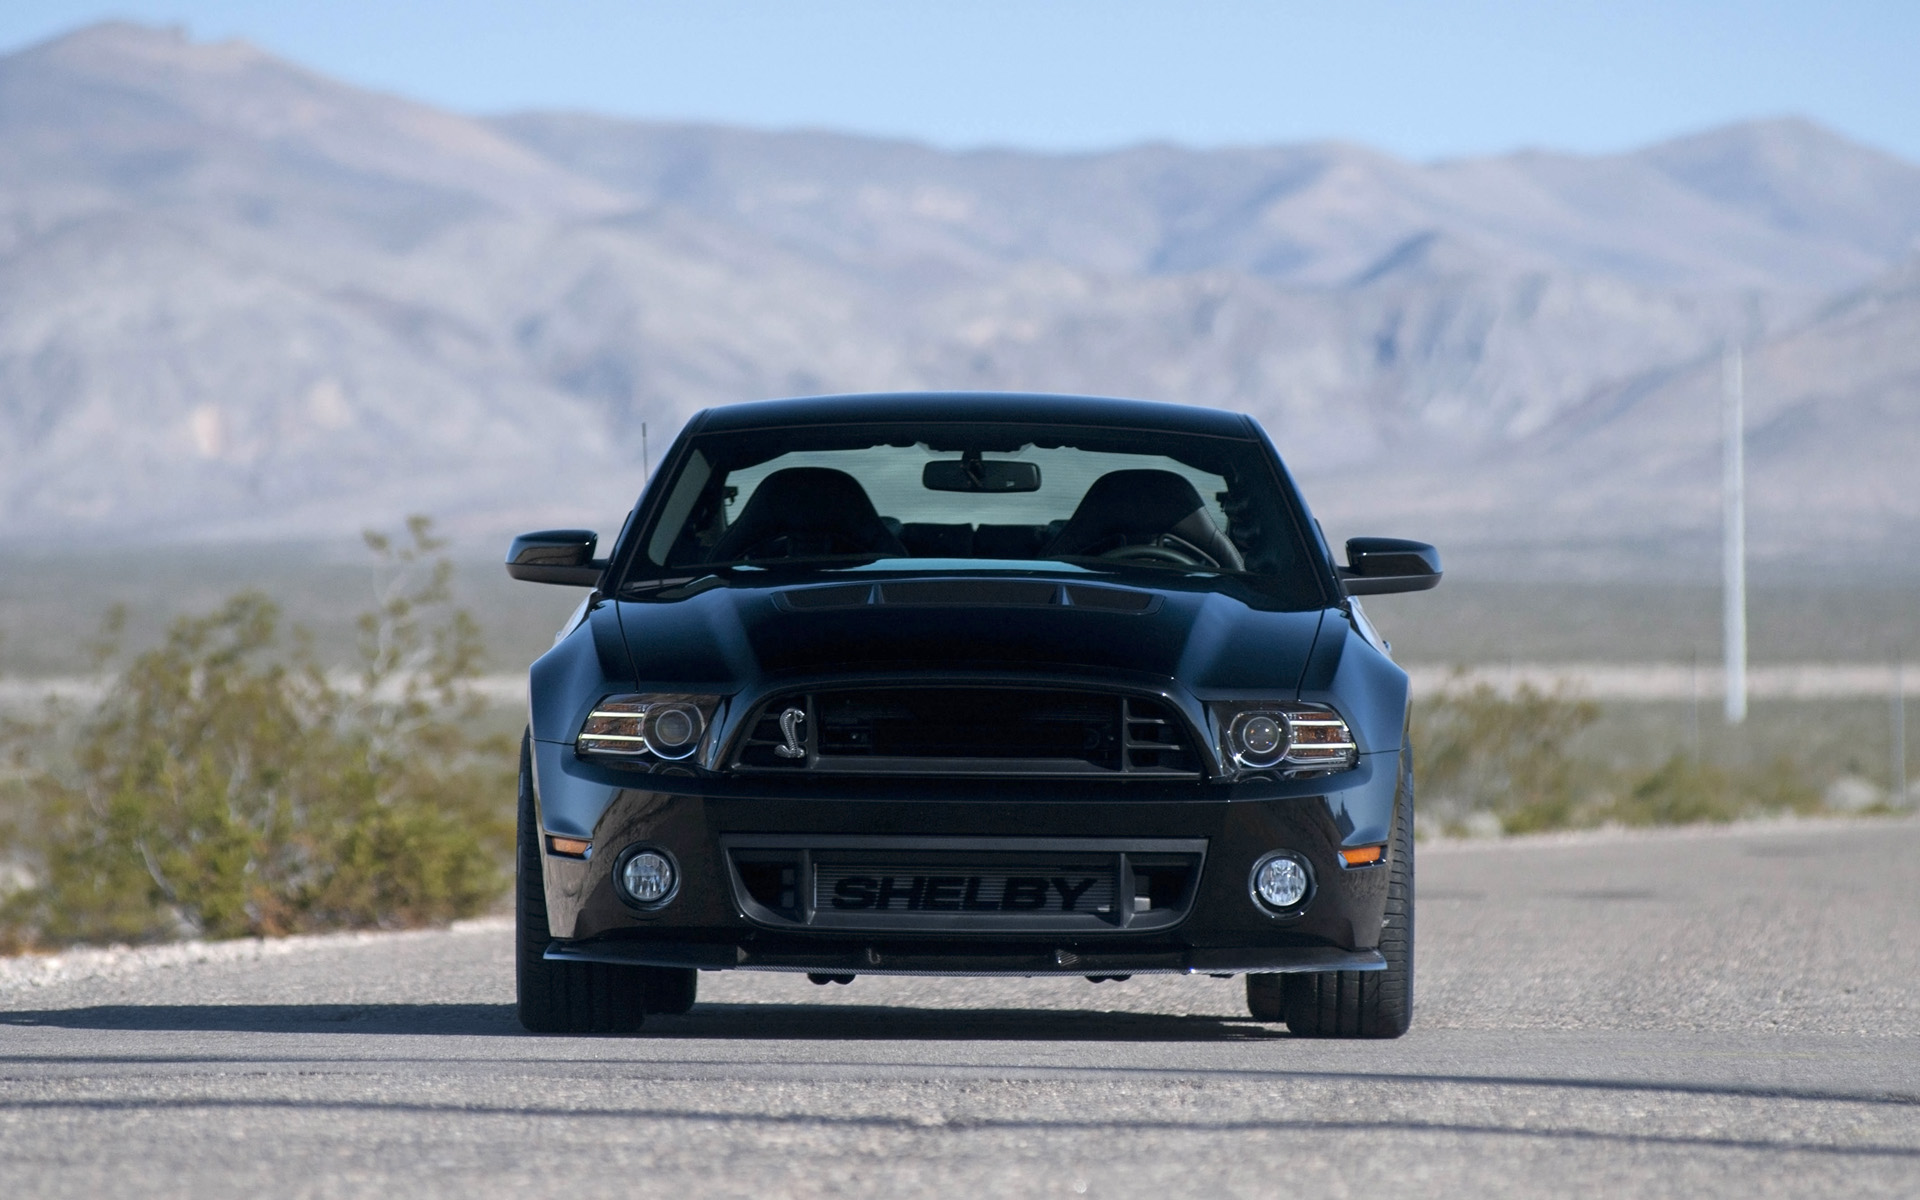 2013, Shelby, 1000, Ford, Mustang, Muscle, Supercar Wallpaper